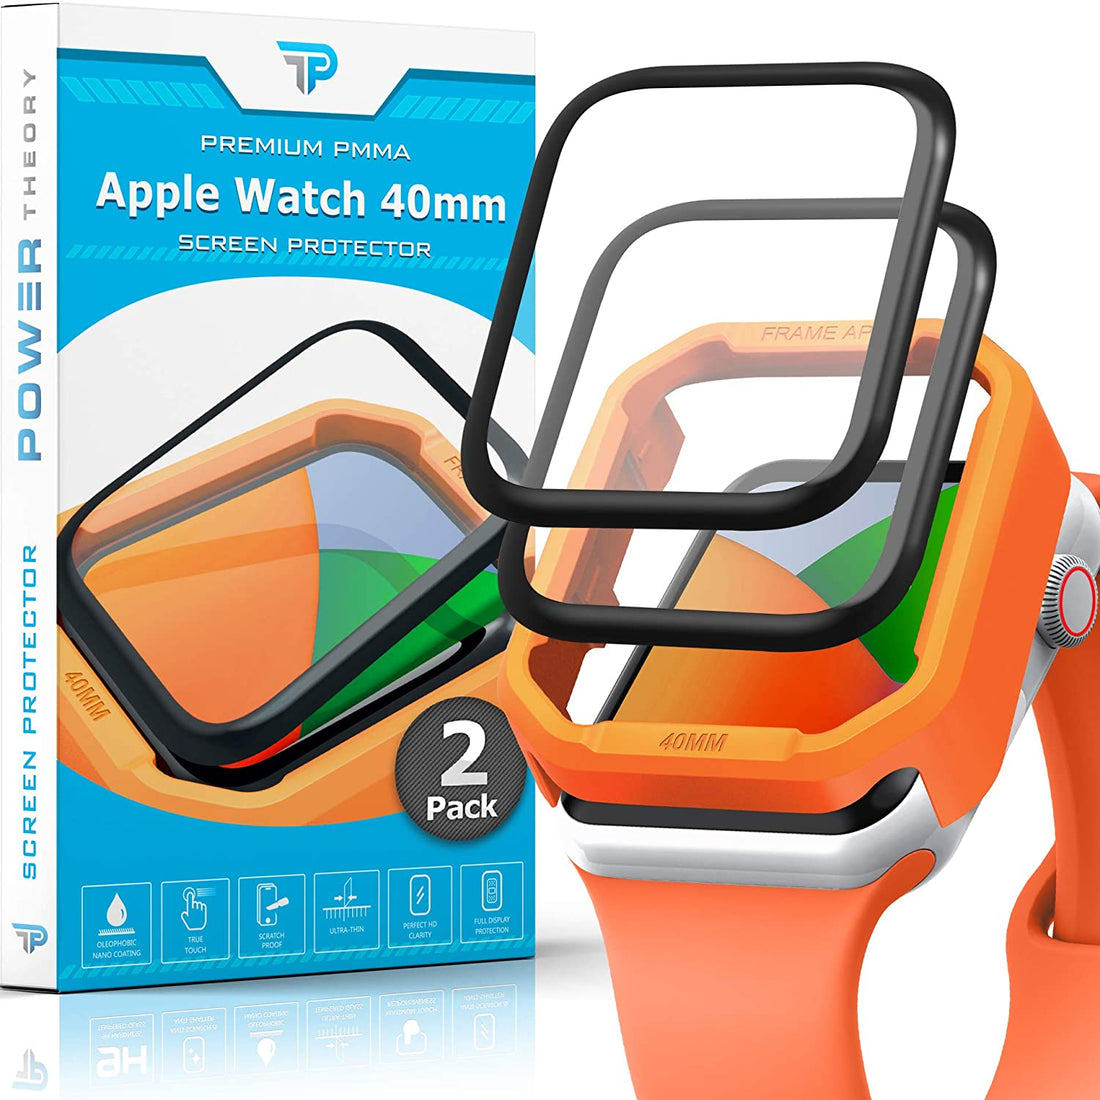 Apple Watch 40mm Premium PMMA Screen Protector [2-Pack] Preview #1